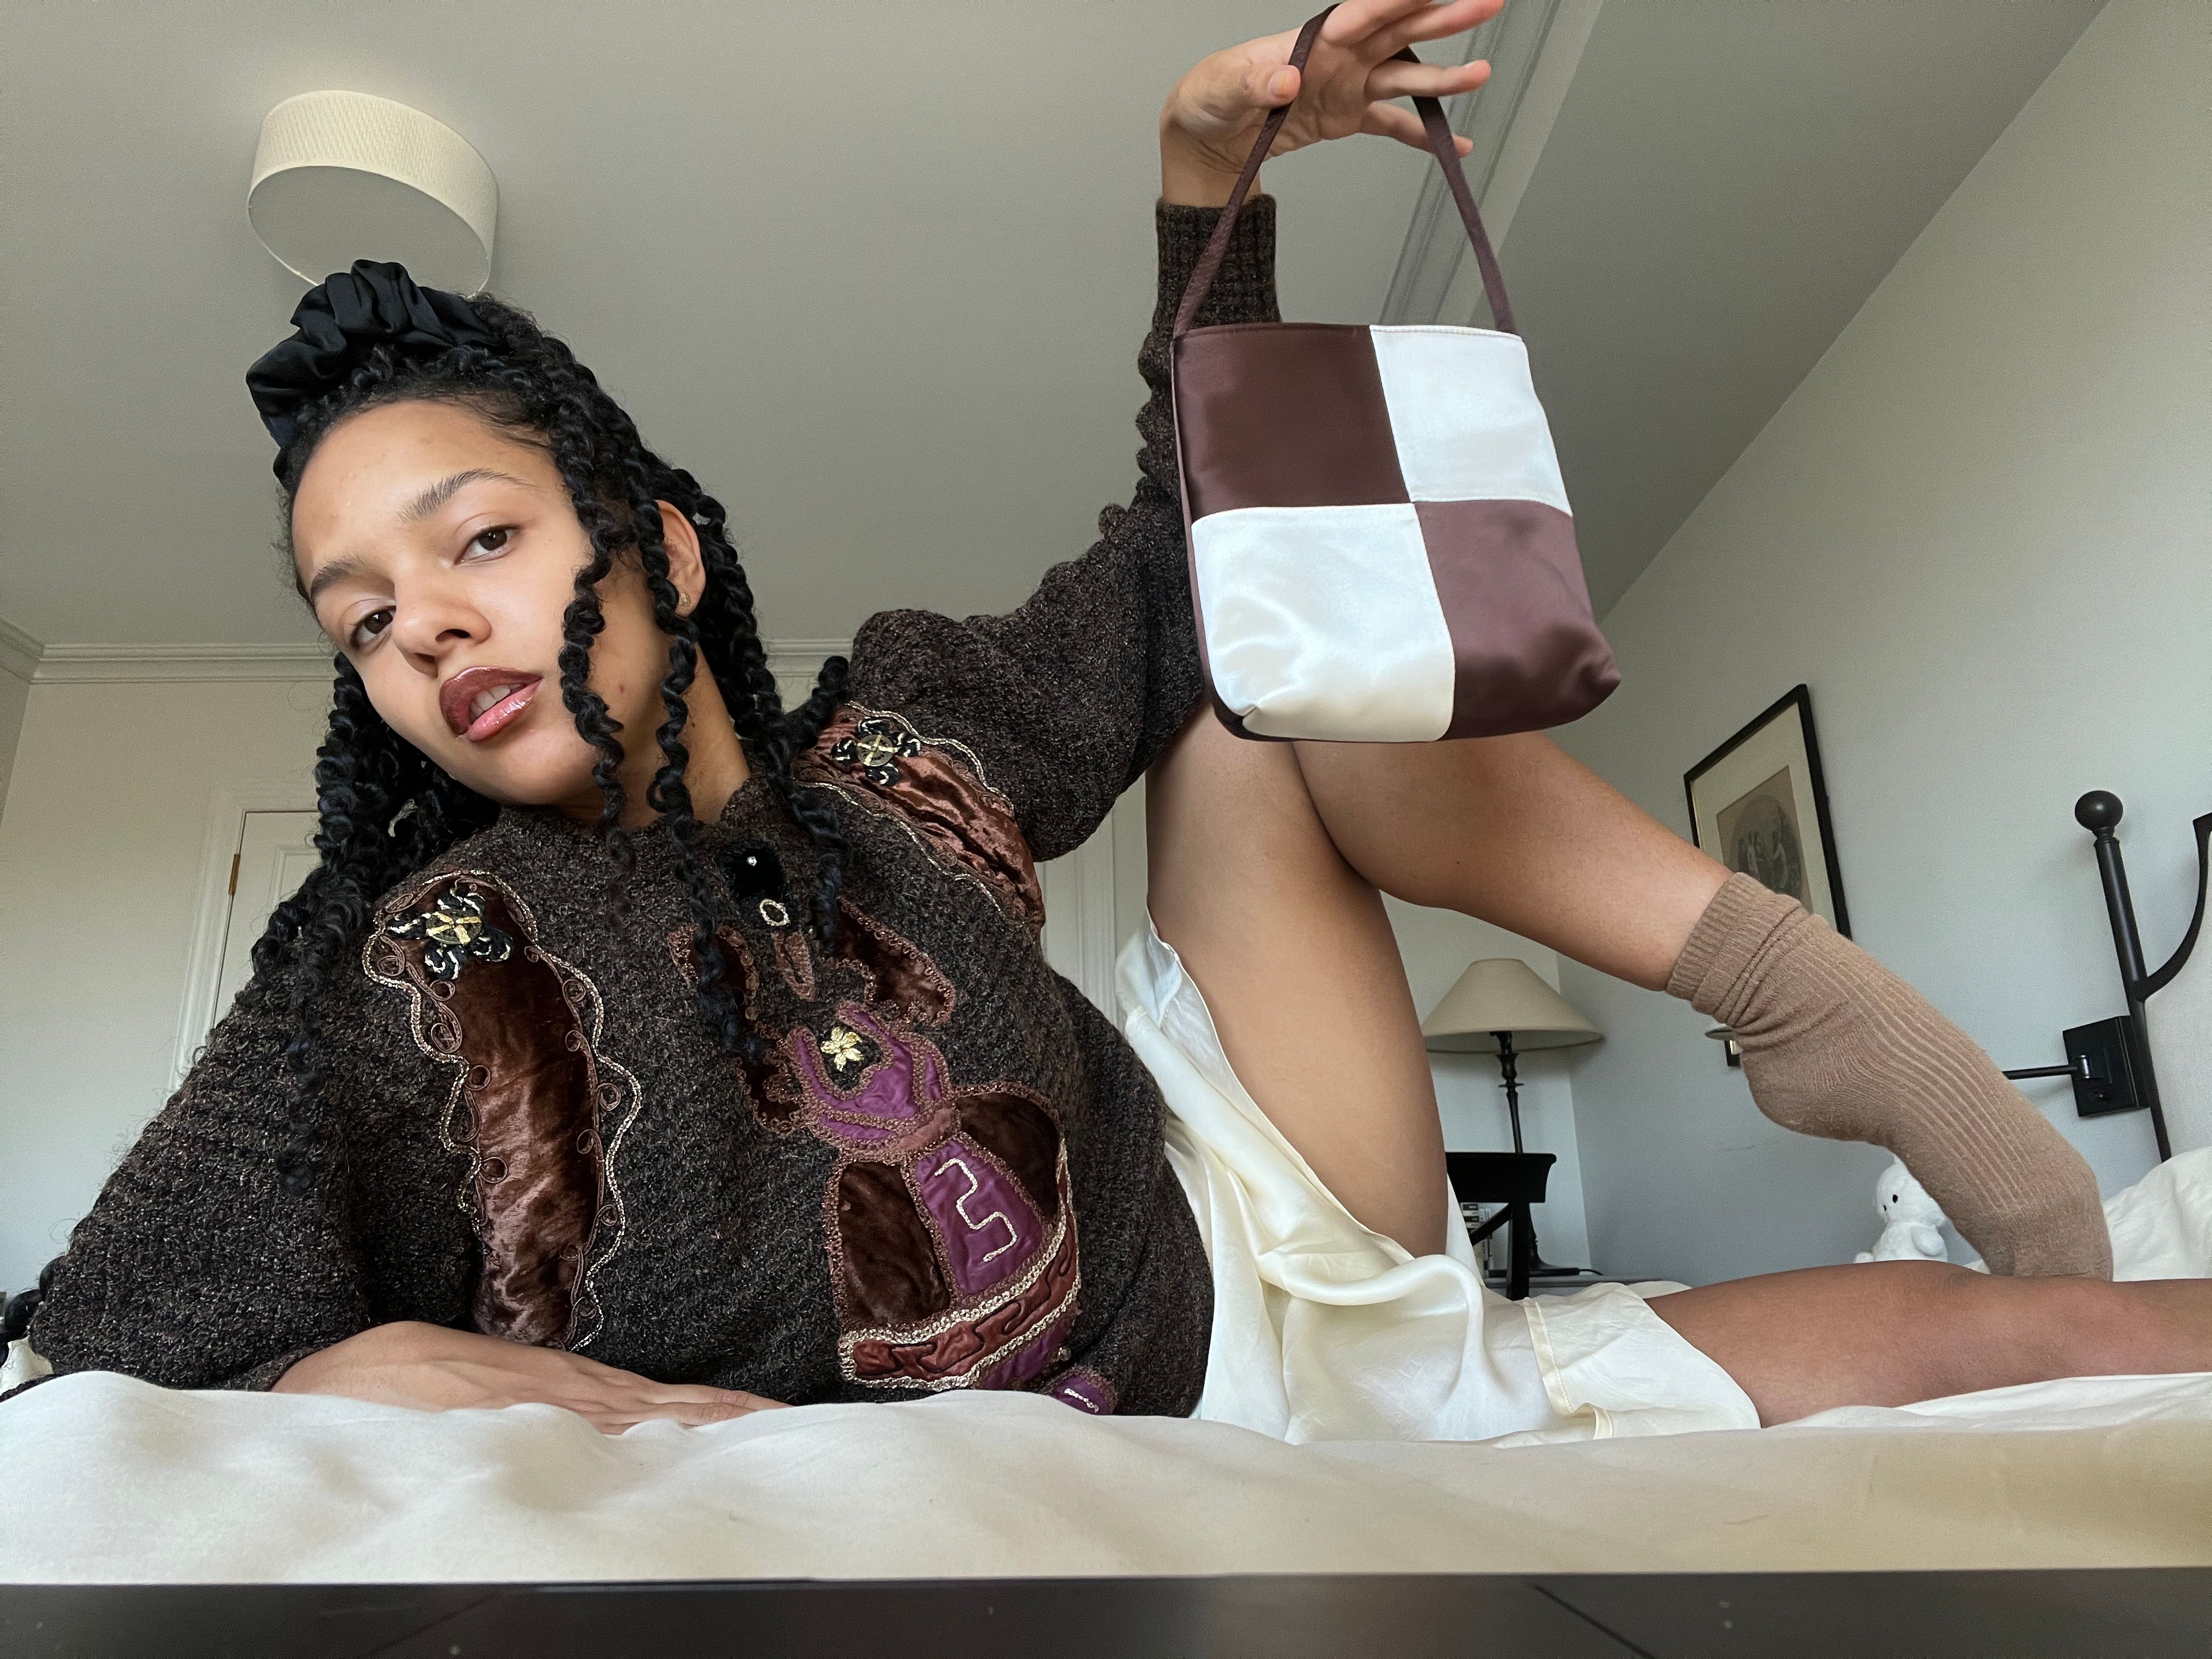 Actor Djouliet Amara poses with a Hai checkerboard silk bag in brown and white